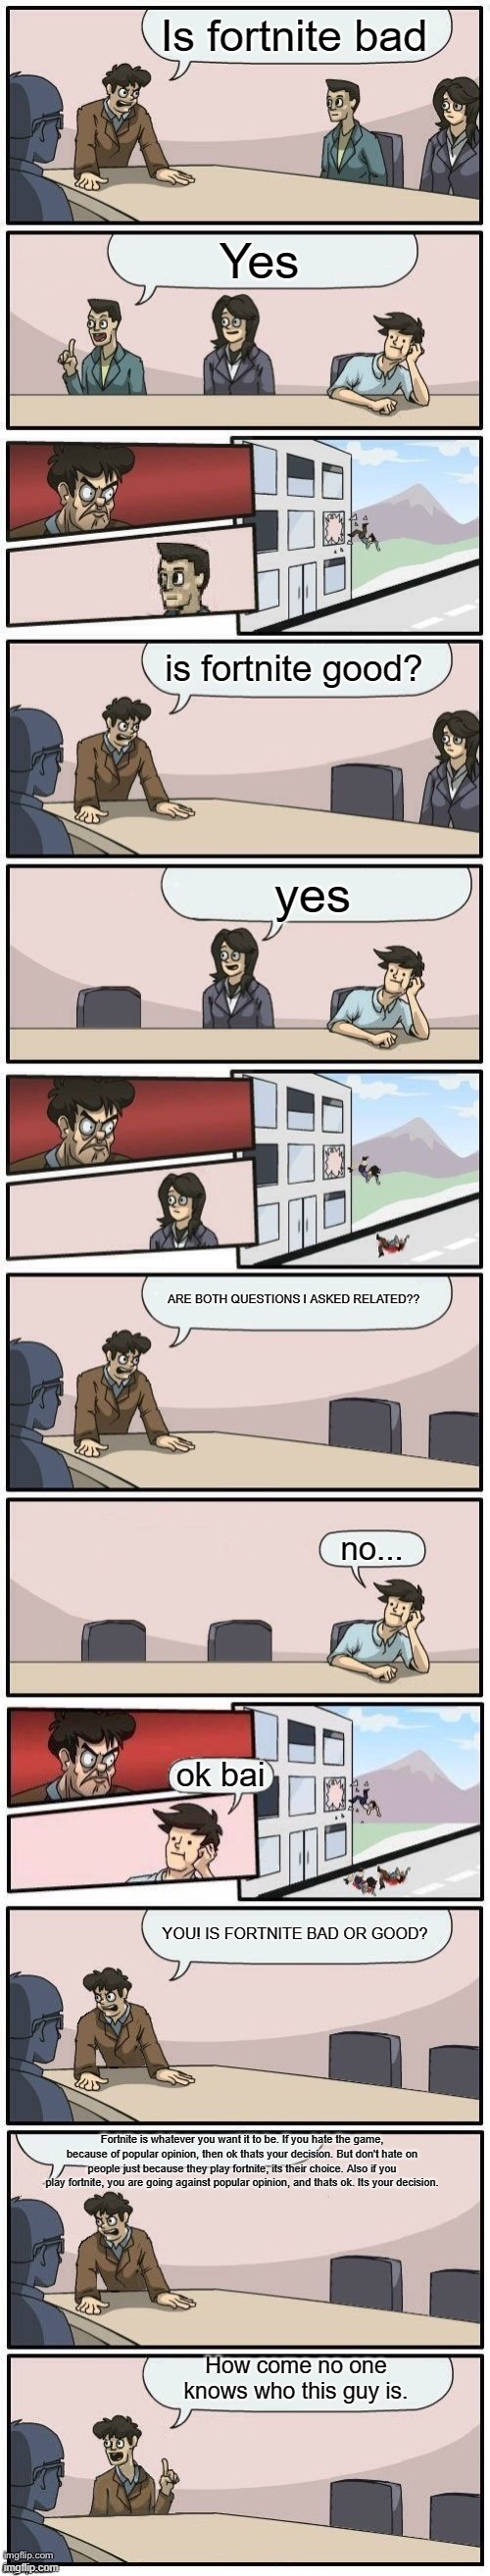 Extended boardroom meeting suggestion | Is fortnite bad; Yes; is fortnite good? yes; ARE BOTH QUESTIONS I ASKED RELATED?? no... ok bai; YOU! IS FORTNITE BAD OR GOOD? Fortnite is whatever you want it to be. If you hate the game, because of popular opinion, then ok thats your decision. But don't hate on people just because they play fortnite, its their choice. Also if you play fortnite, you are going against popular opinion, and thats ok. Its your decision. How come no one knows who this guy is. | image tagged in extended boardroom meeting suggestion | made w/ Imgflip meme maker